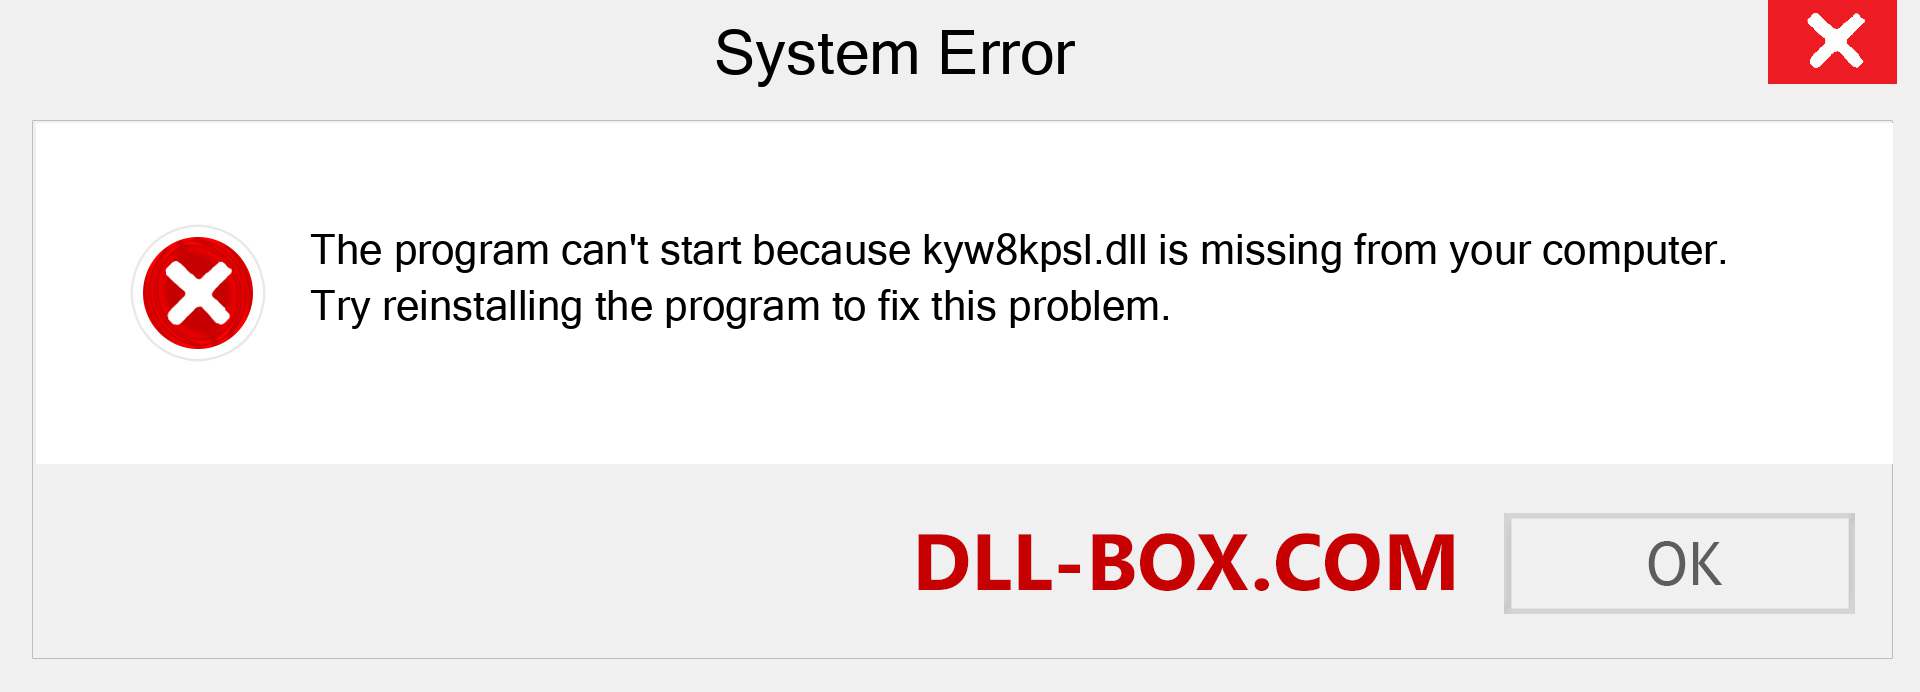  kyw8kpsl.dll file is missing?. Download for Windows 7, 8, 10 - Fix  kyw8kpsl dll Missing Error on Windows, photos, images